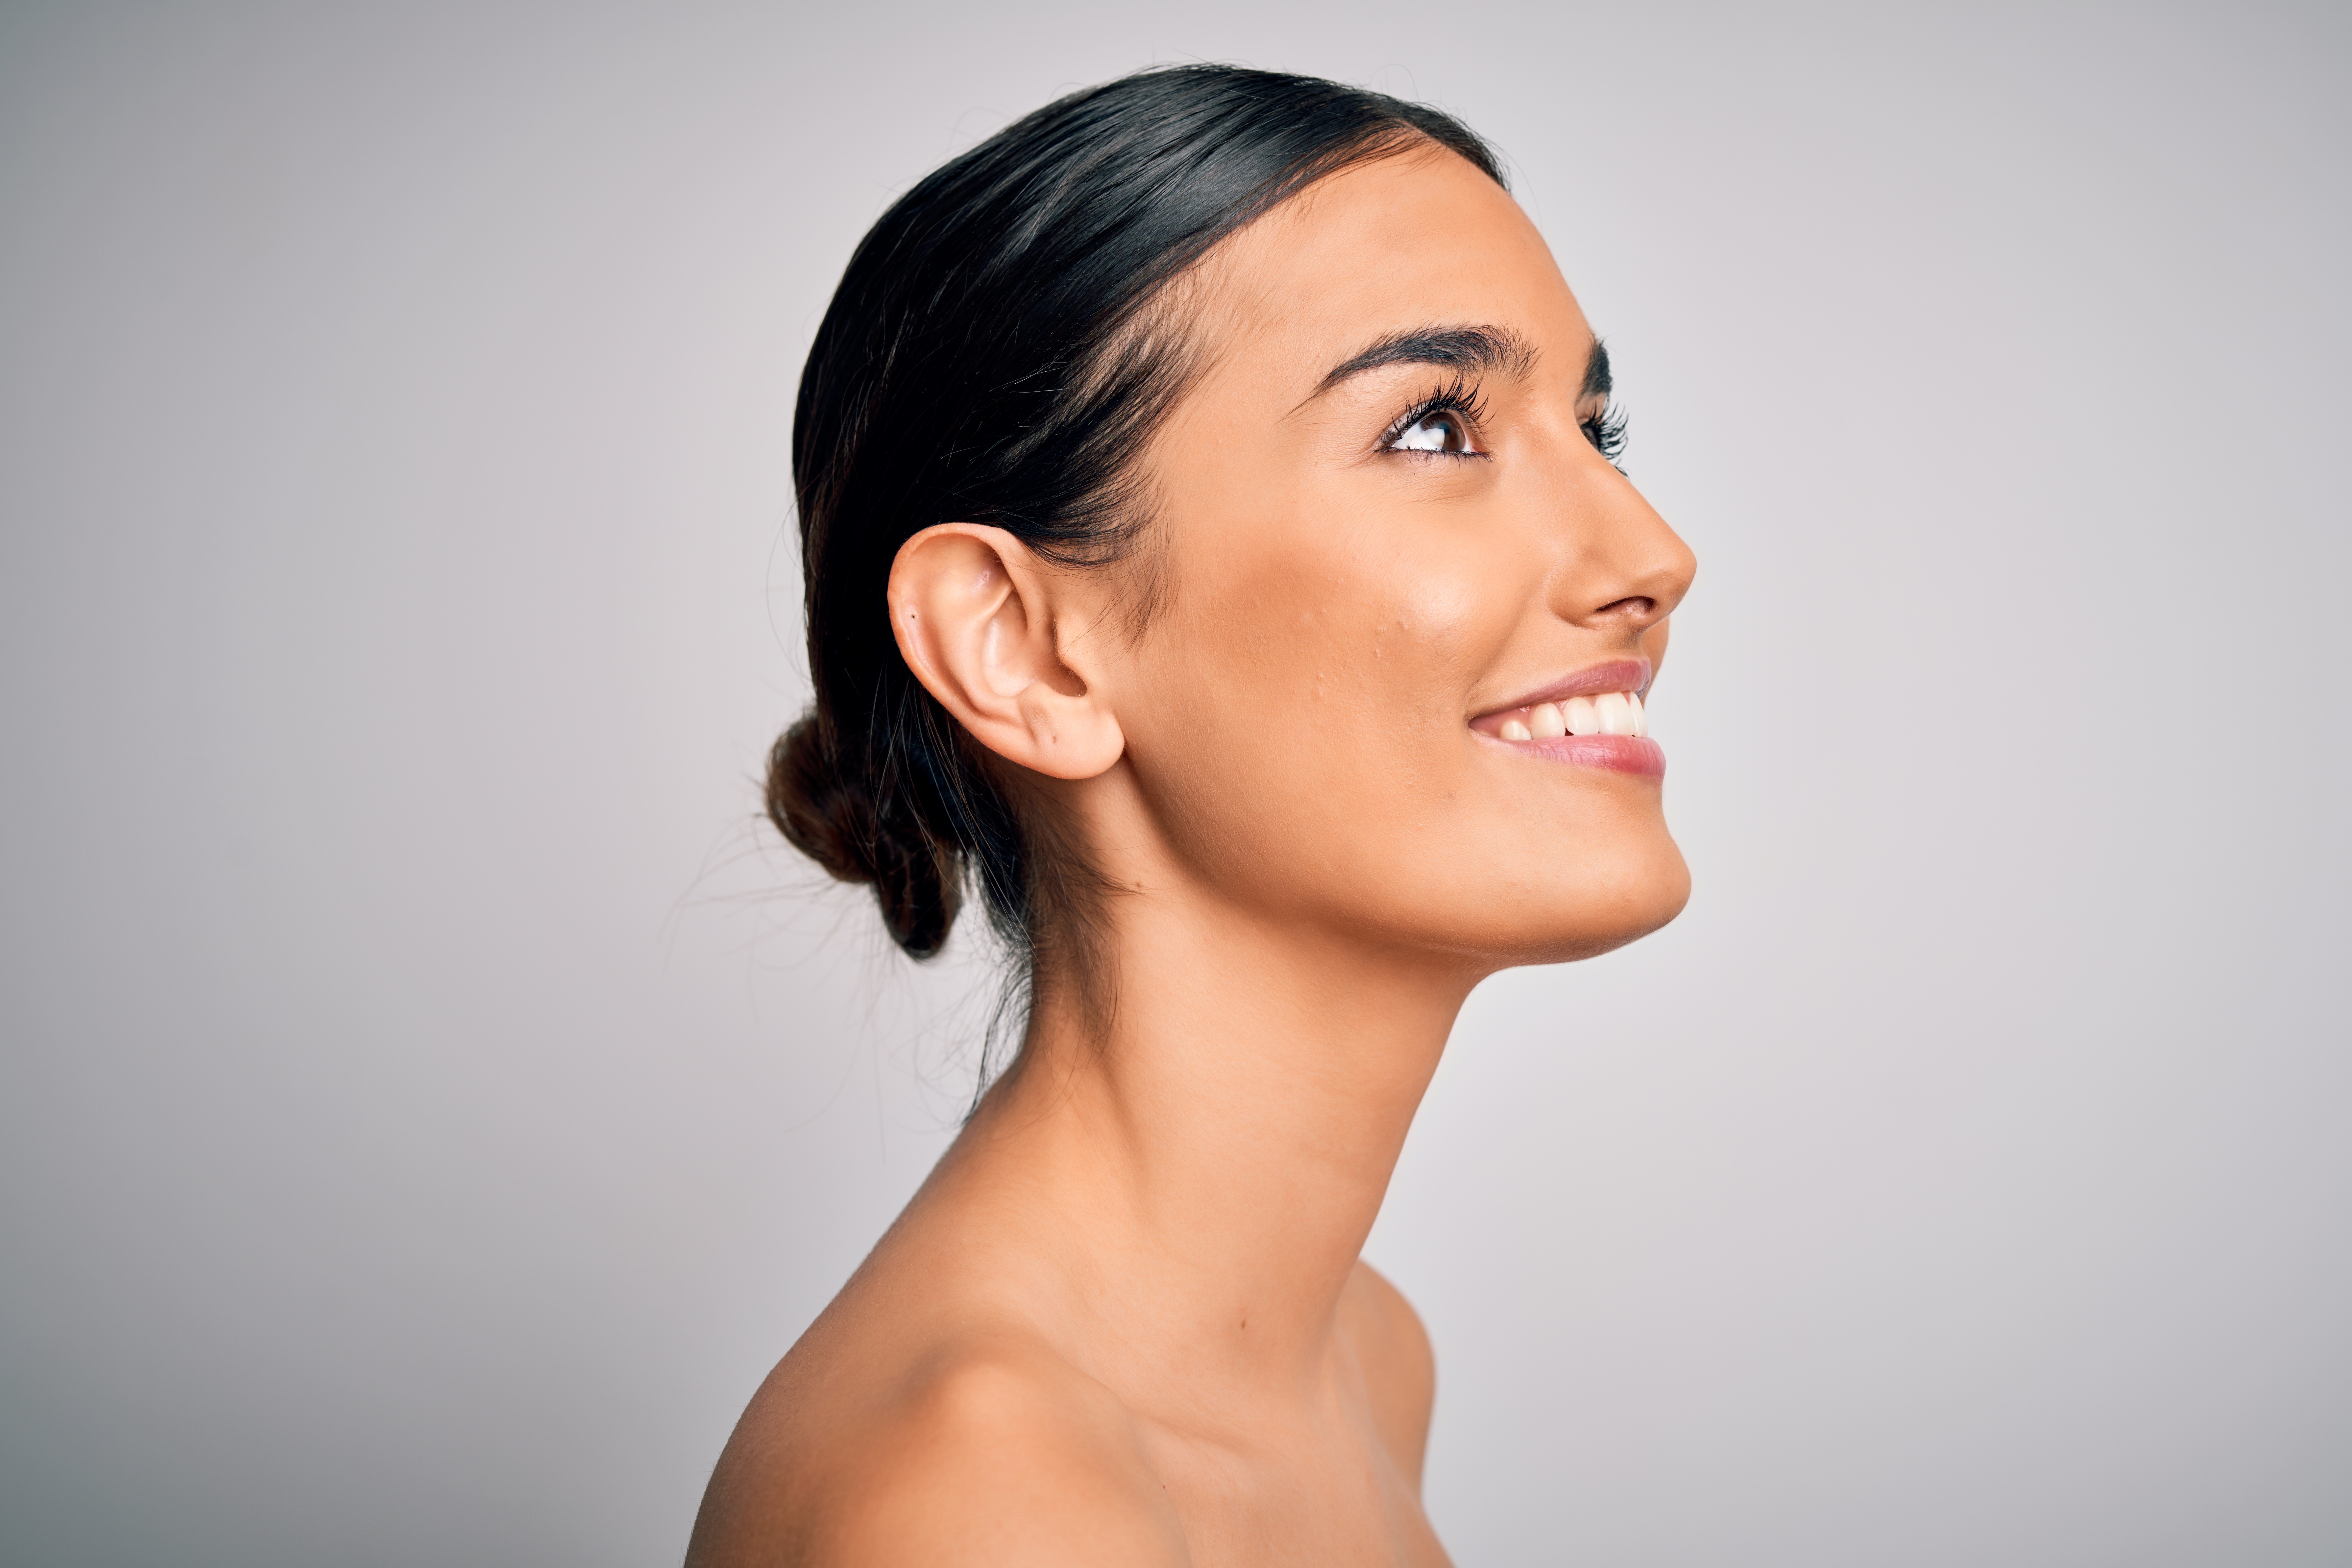 Chin liposuction, or submental liposuction, targets the area beneath the chin and along the jawline.